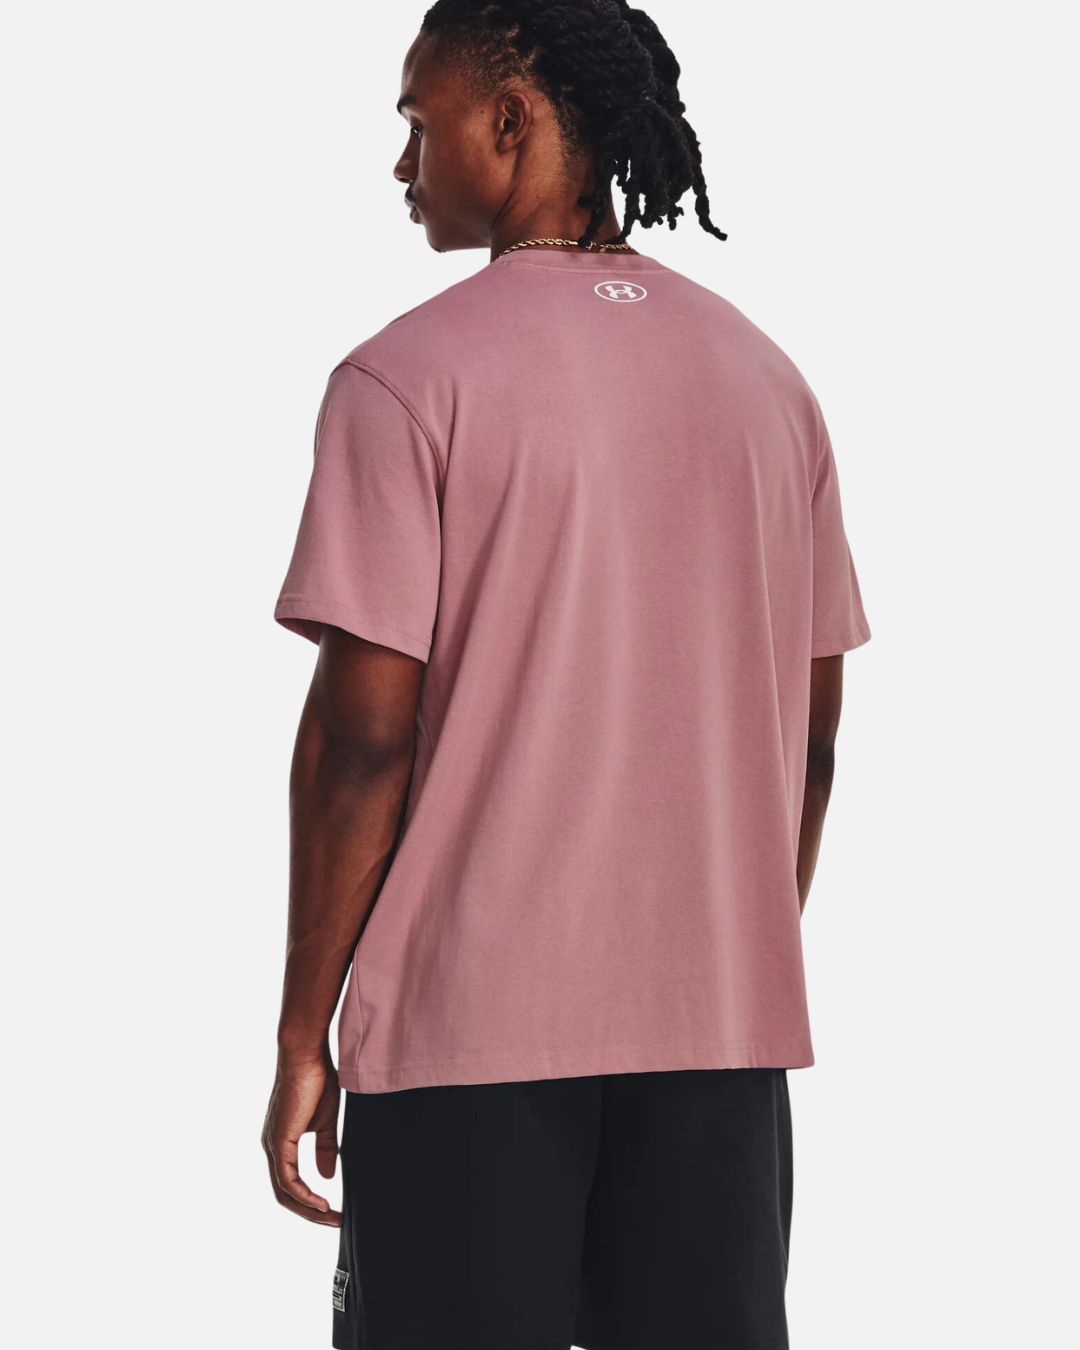 Under Armor Boxed T-shirt - Pink